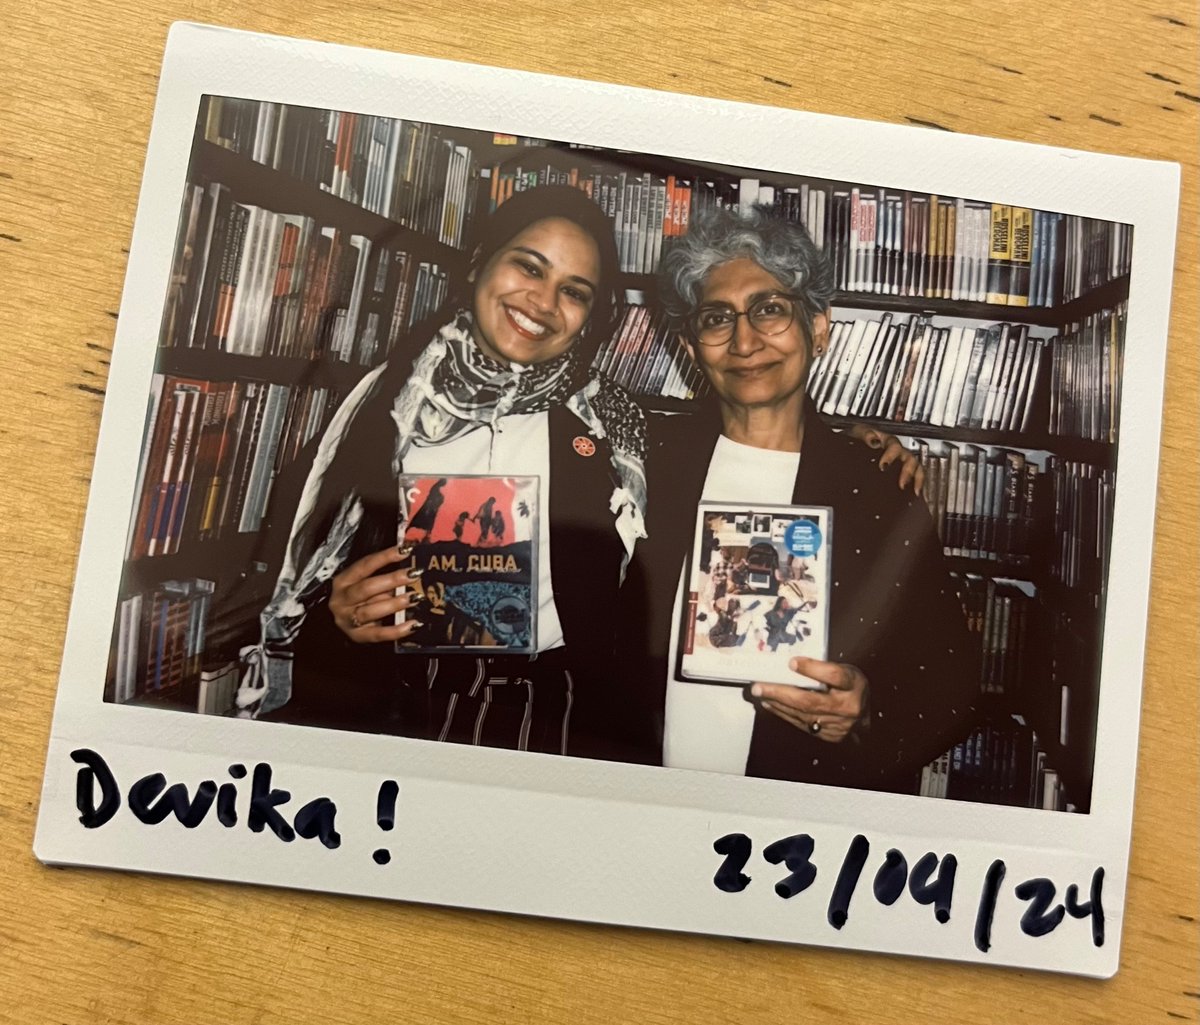 Four years ago I first connected with Deepa; one year ago we put her films on the Criterion Channel; and last week she finally came to NY and we went to the closet in person 🥹